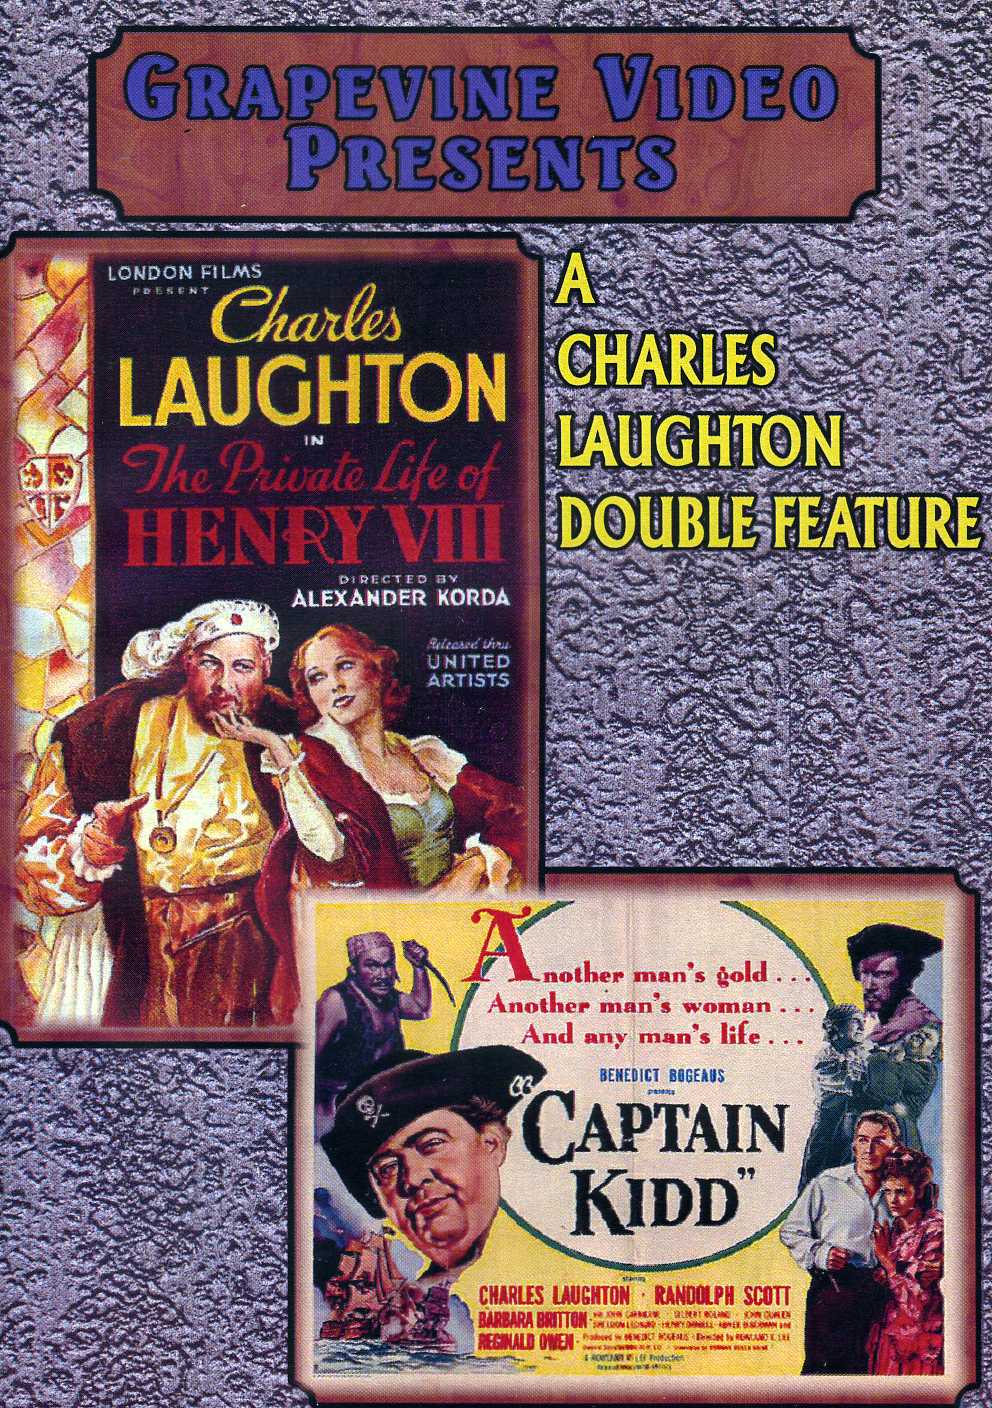 PRIVATE LIFE OF HENRY VIII (1933)/CAPTAIN KIDD (19